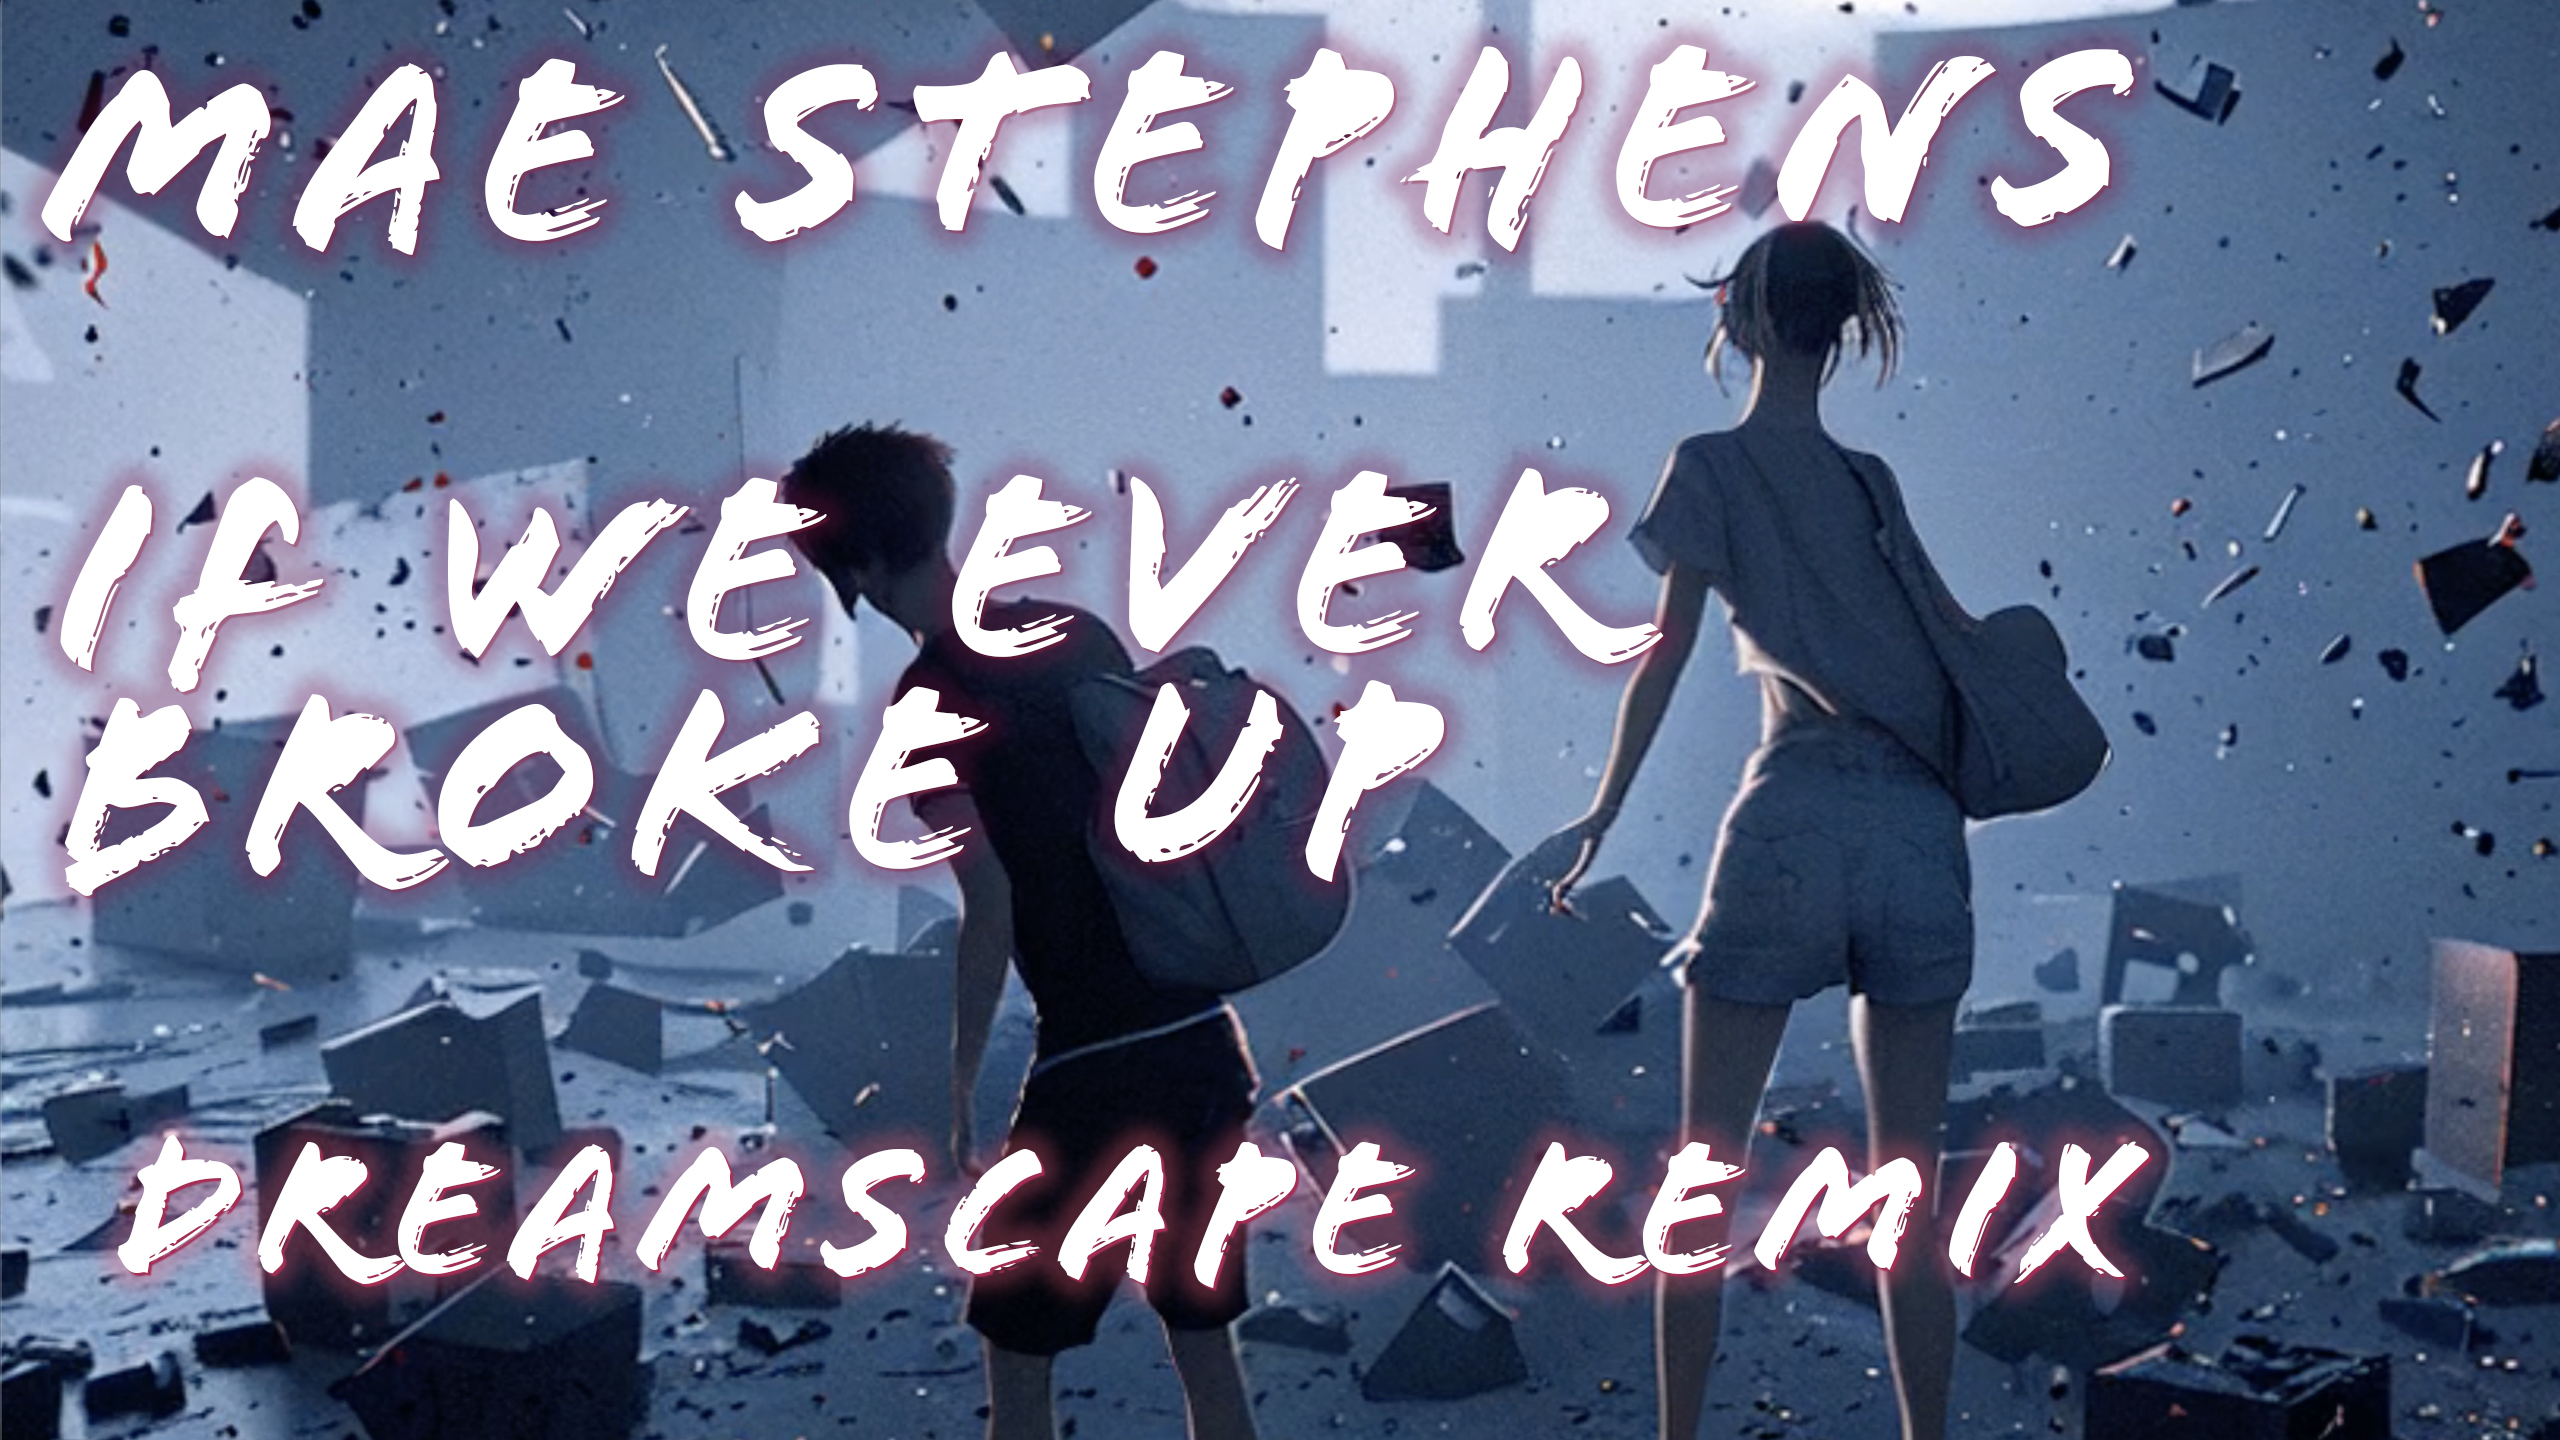 Mae Stephens - If We Ever Broke Up (Dreamscape Remix)